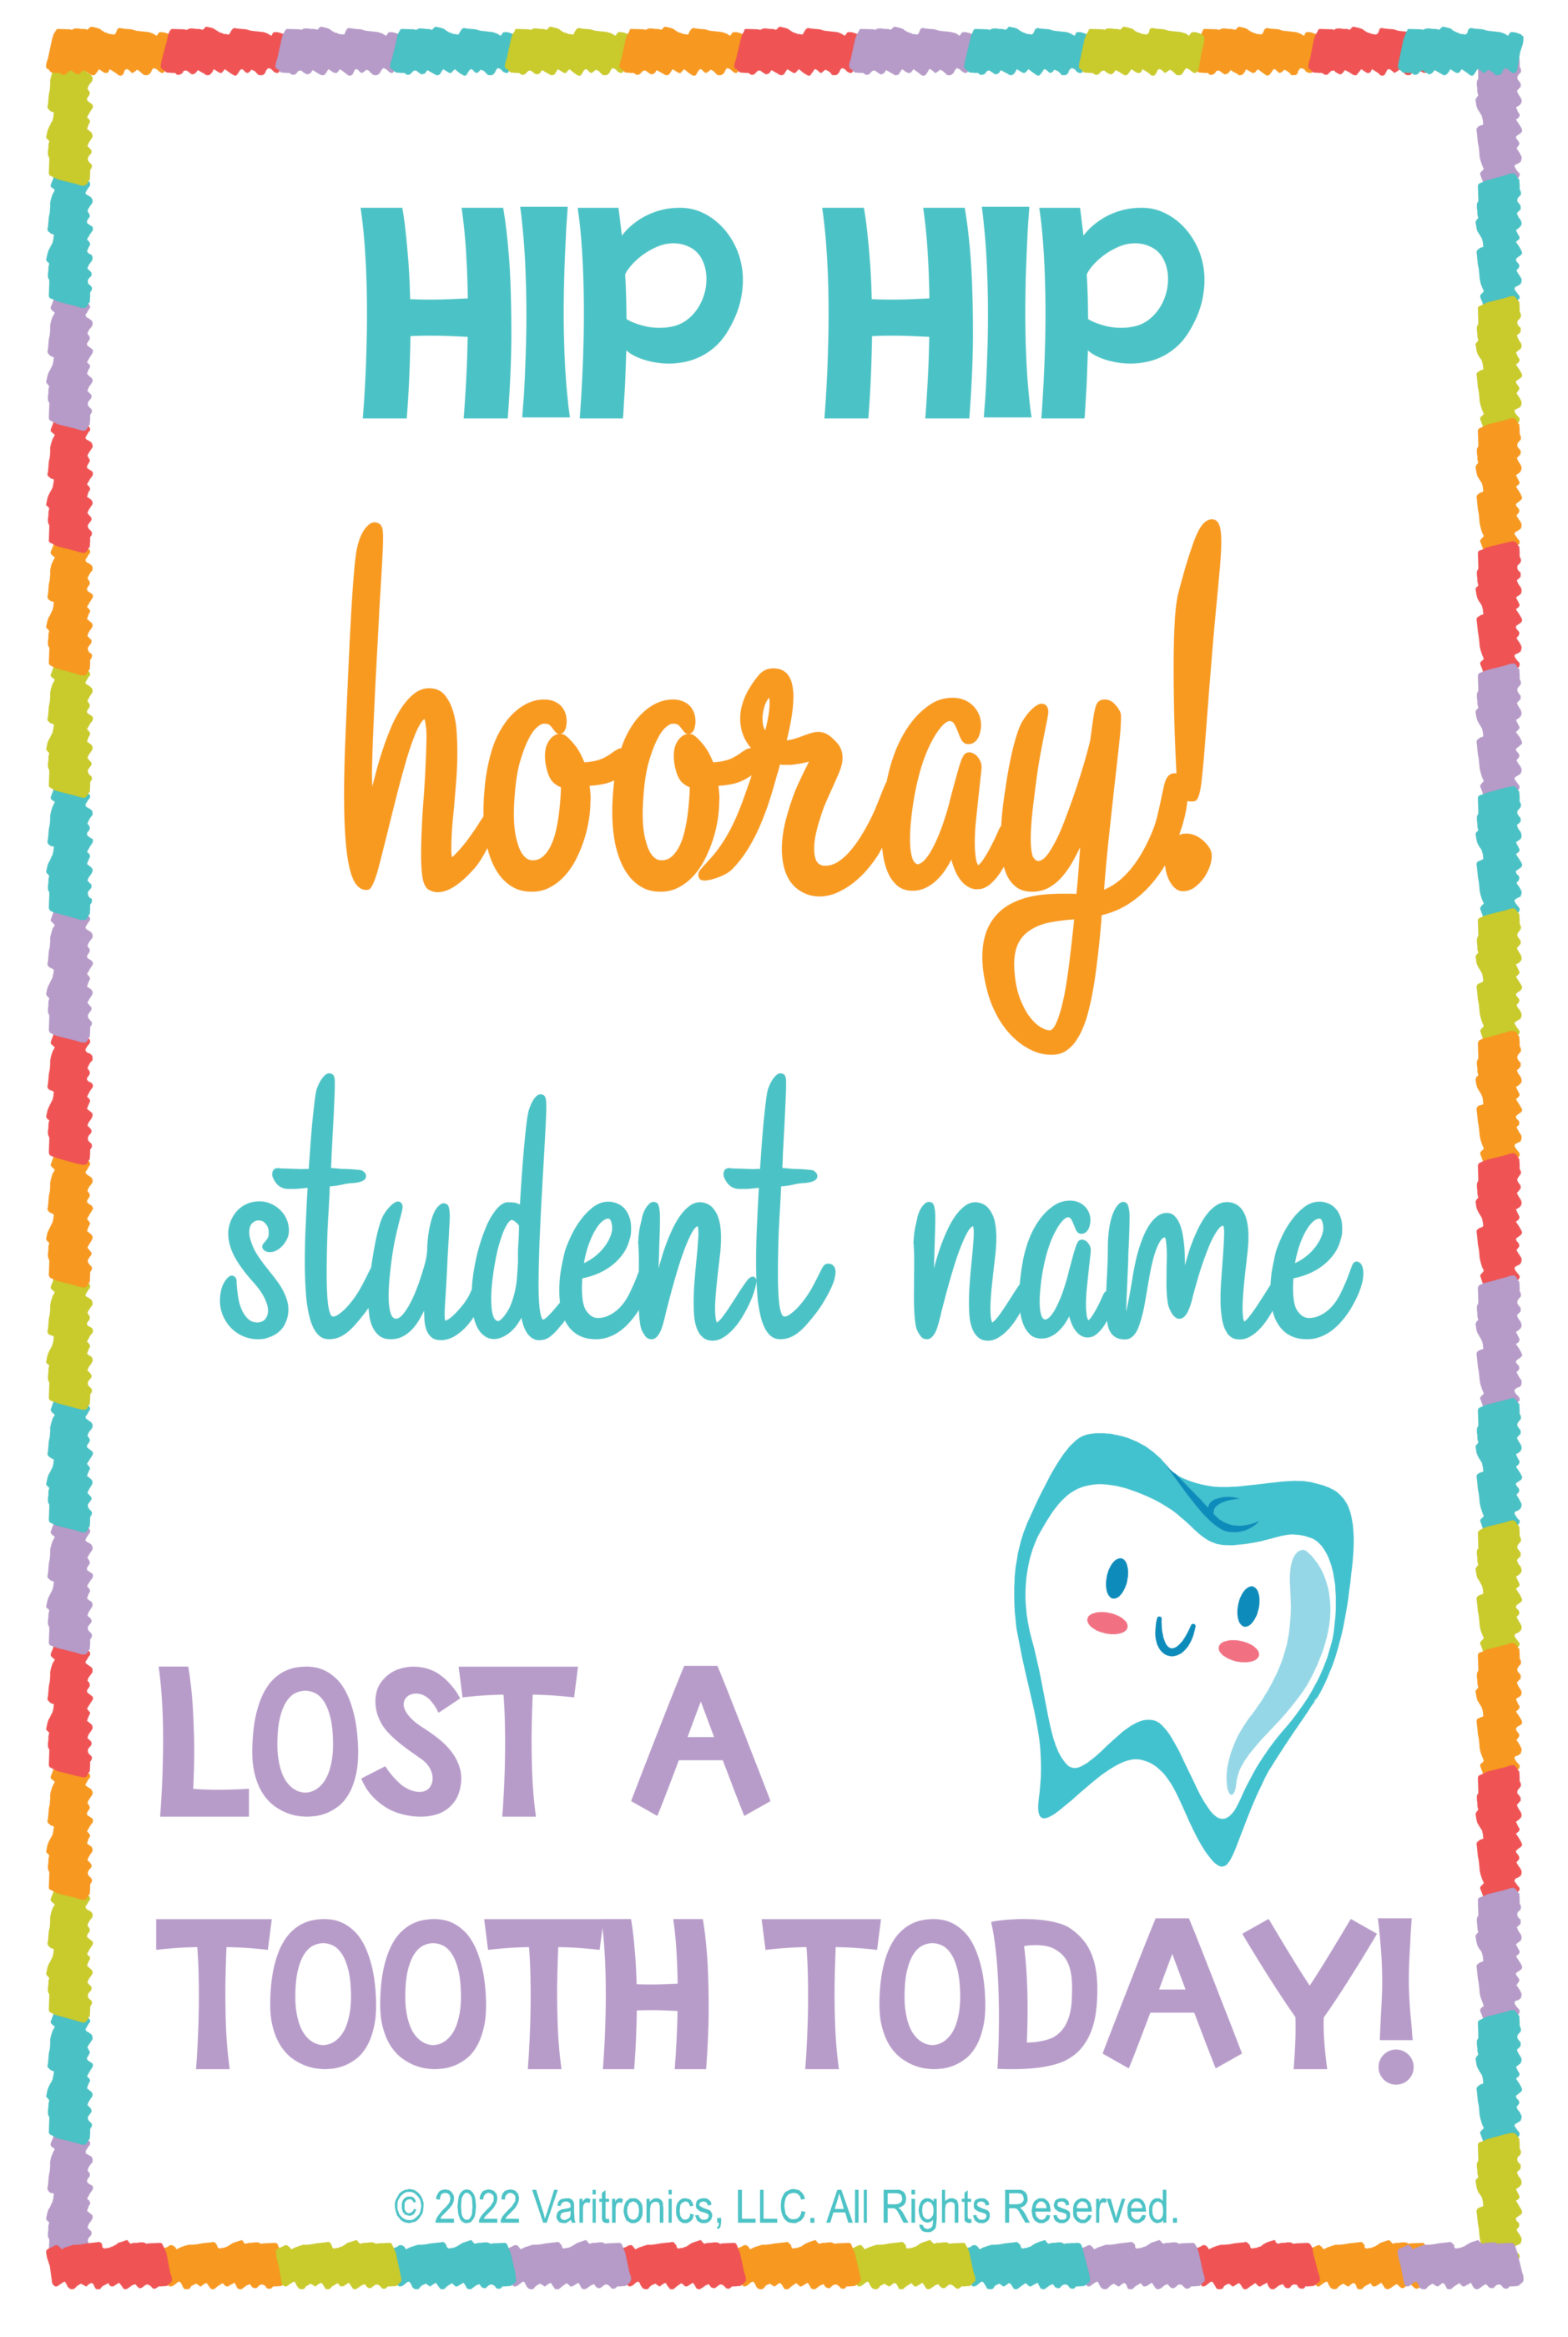 VariQuest motiva output lost a tooth poster